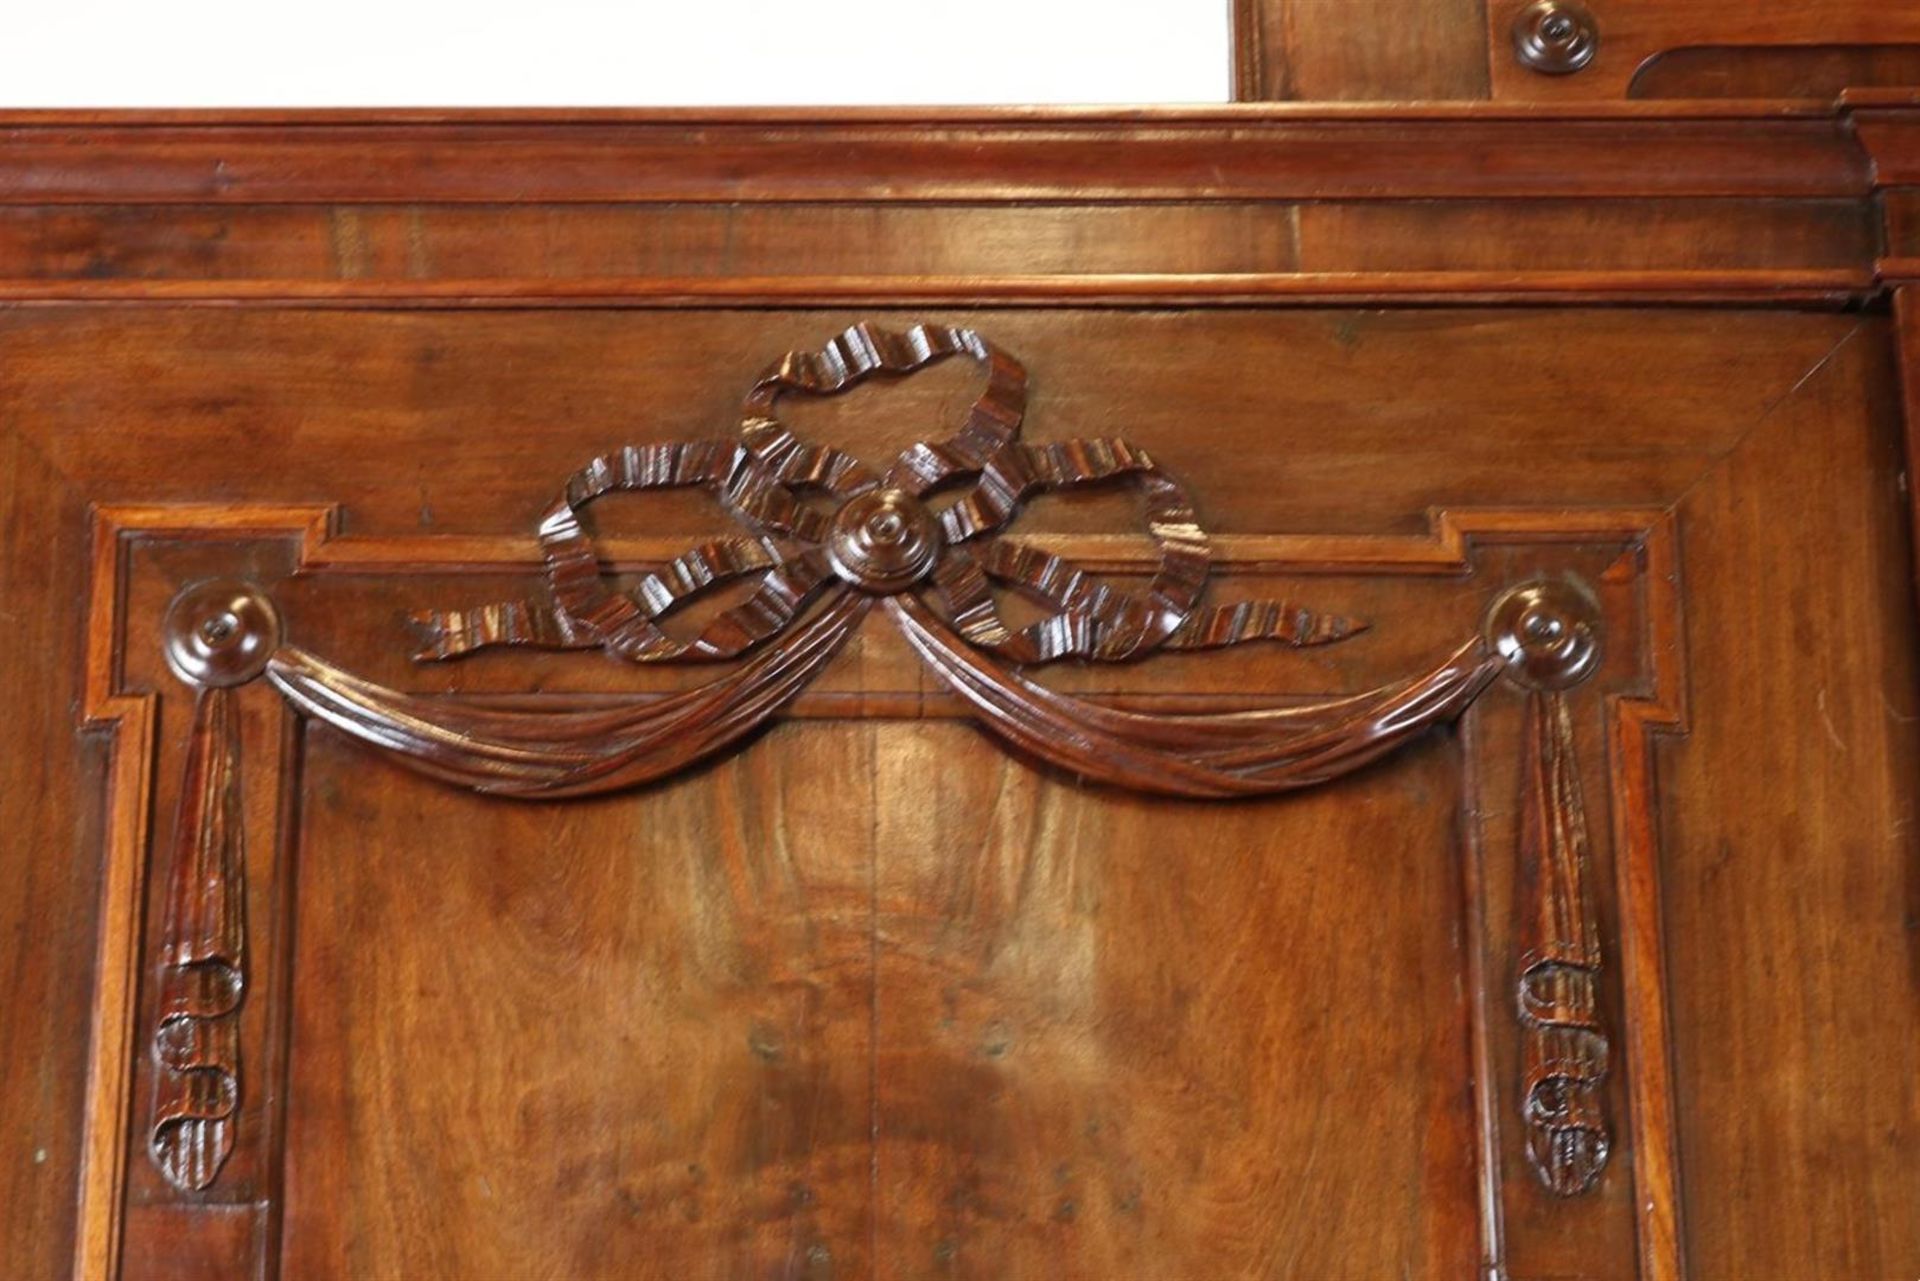 Mahogany Louis XVI cabinet, 2 panel doors with carved garlands and 4 drawers with bronze fittings, - Image 4 of 7